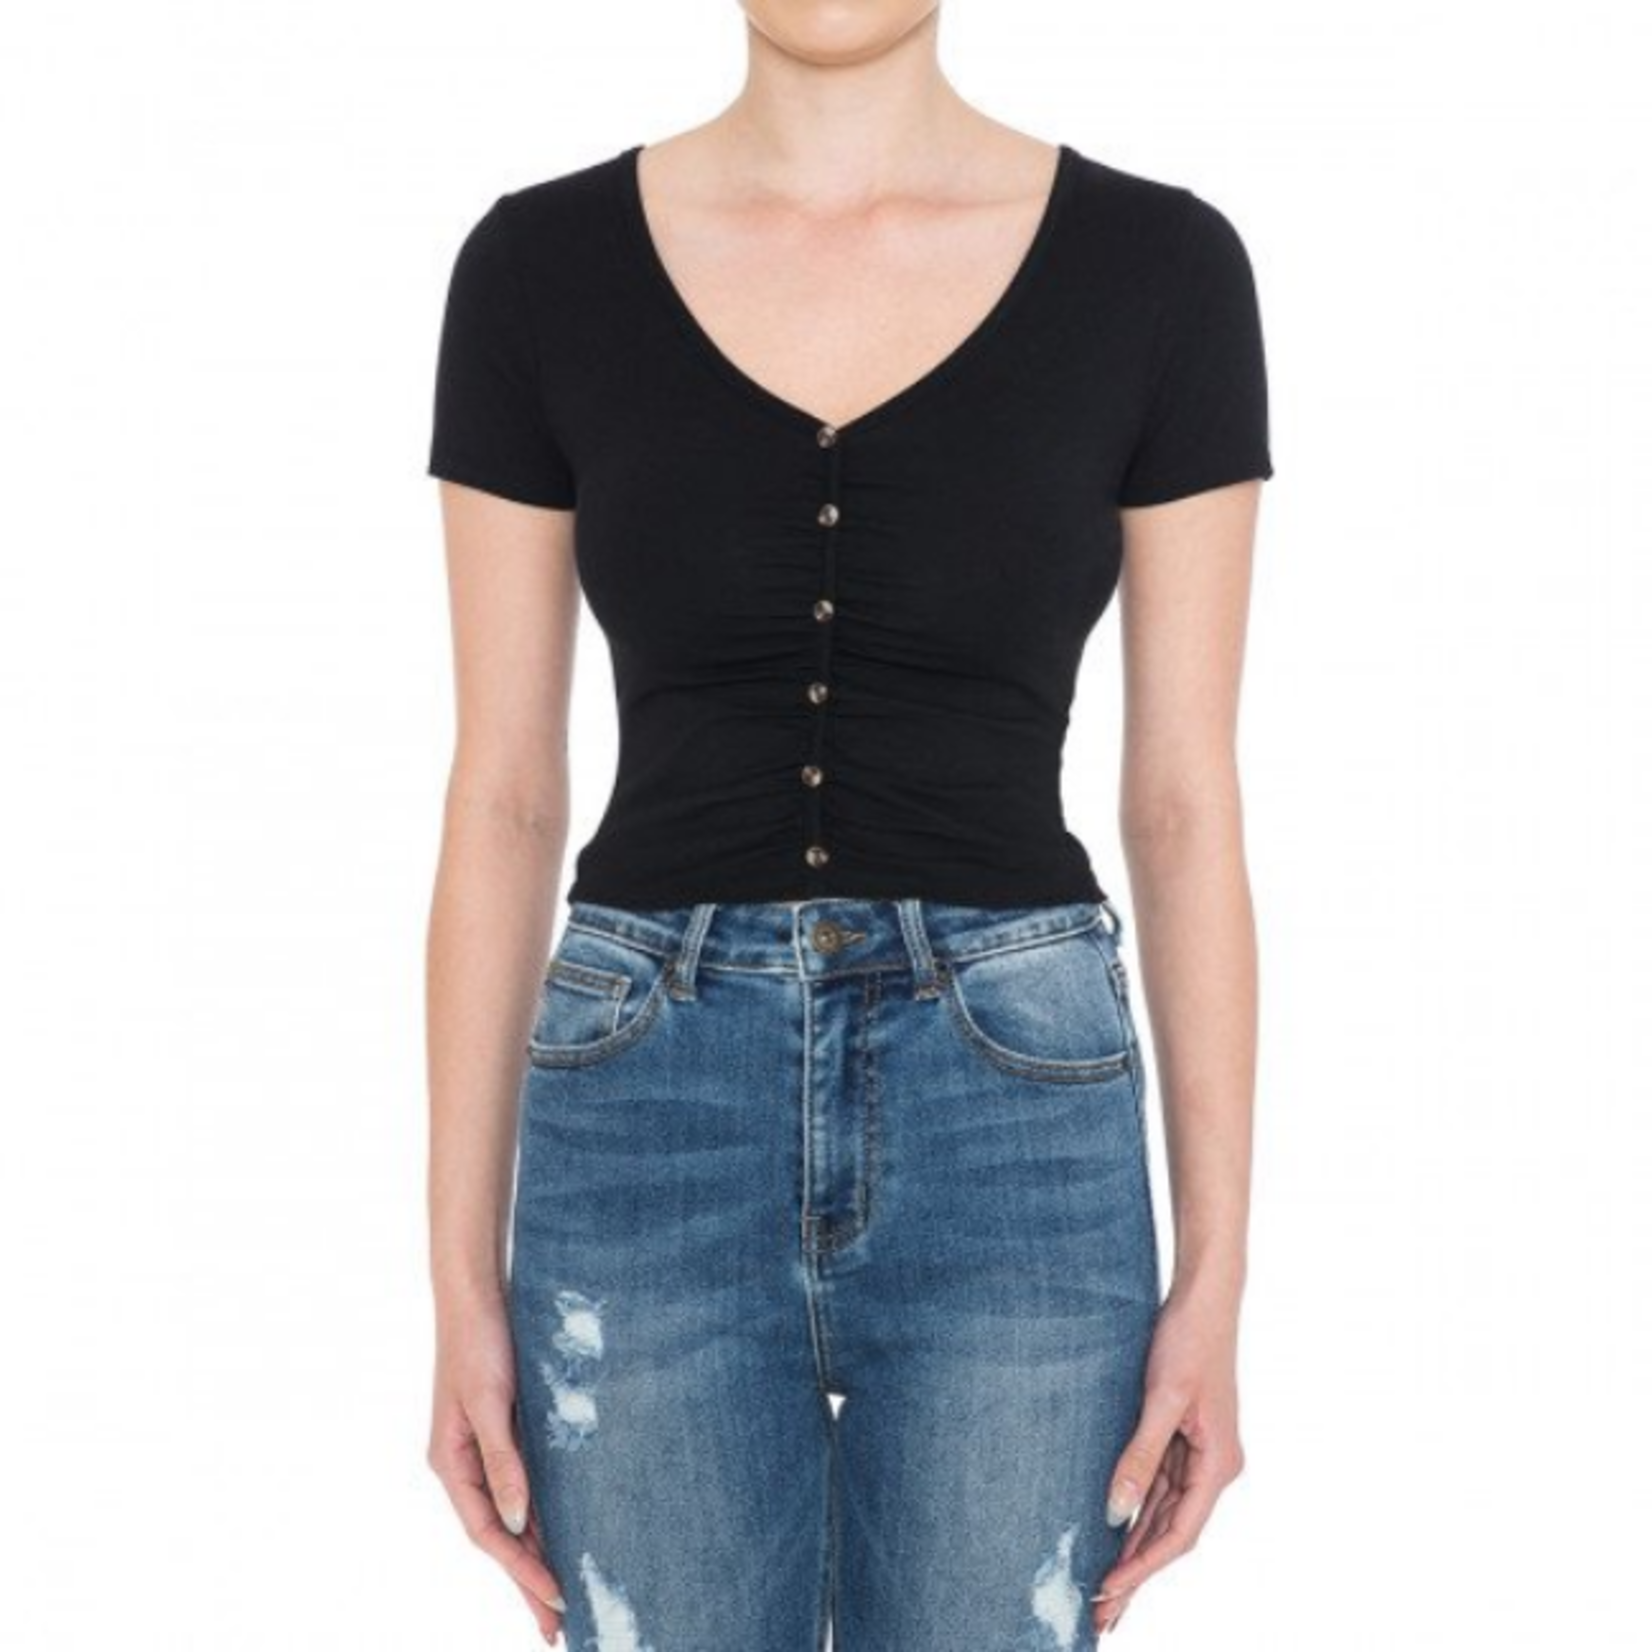 Ambiance Apparel ANBIANCE WOMEN RUCK BK CROP TOP STYLE 73386